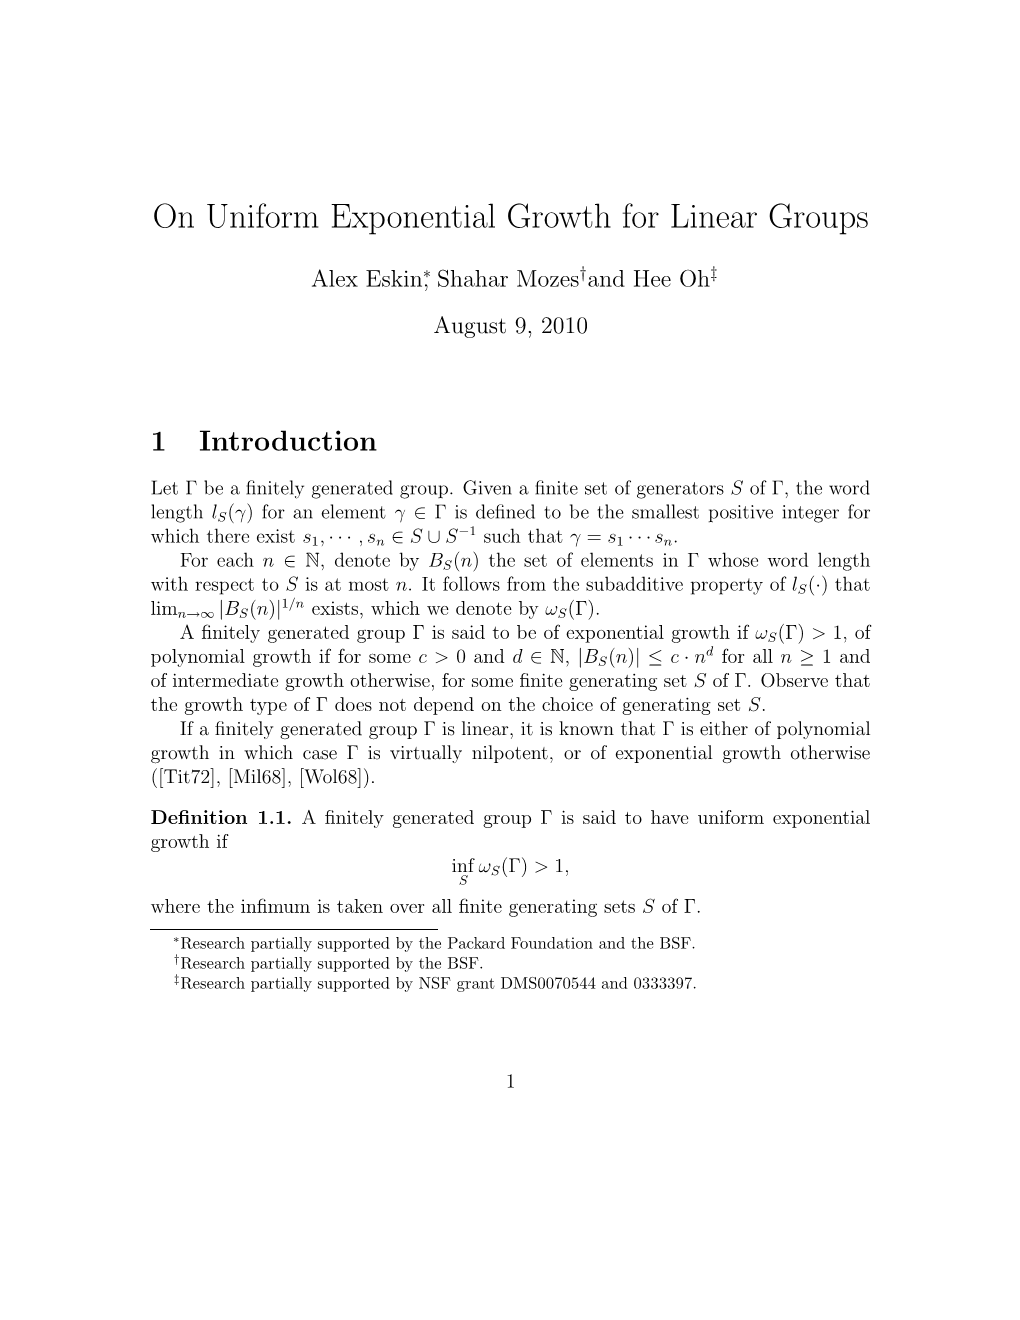 On Uniform Exponential Growth for Linear Groups